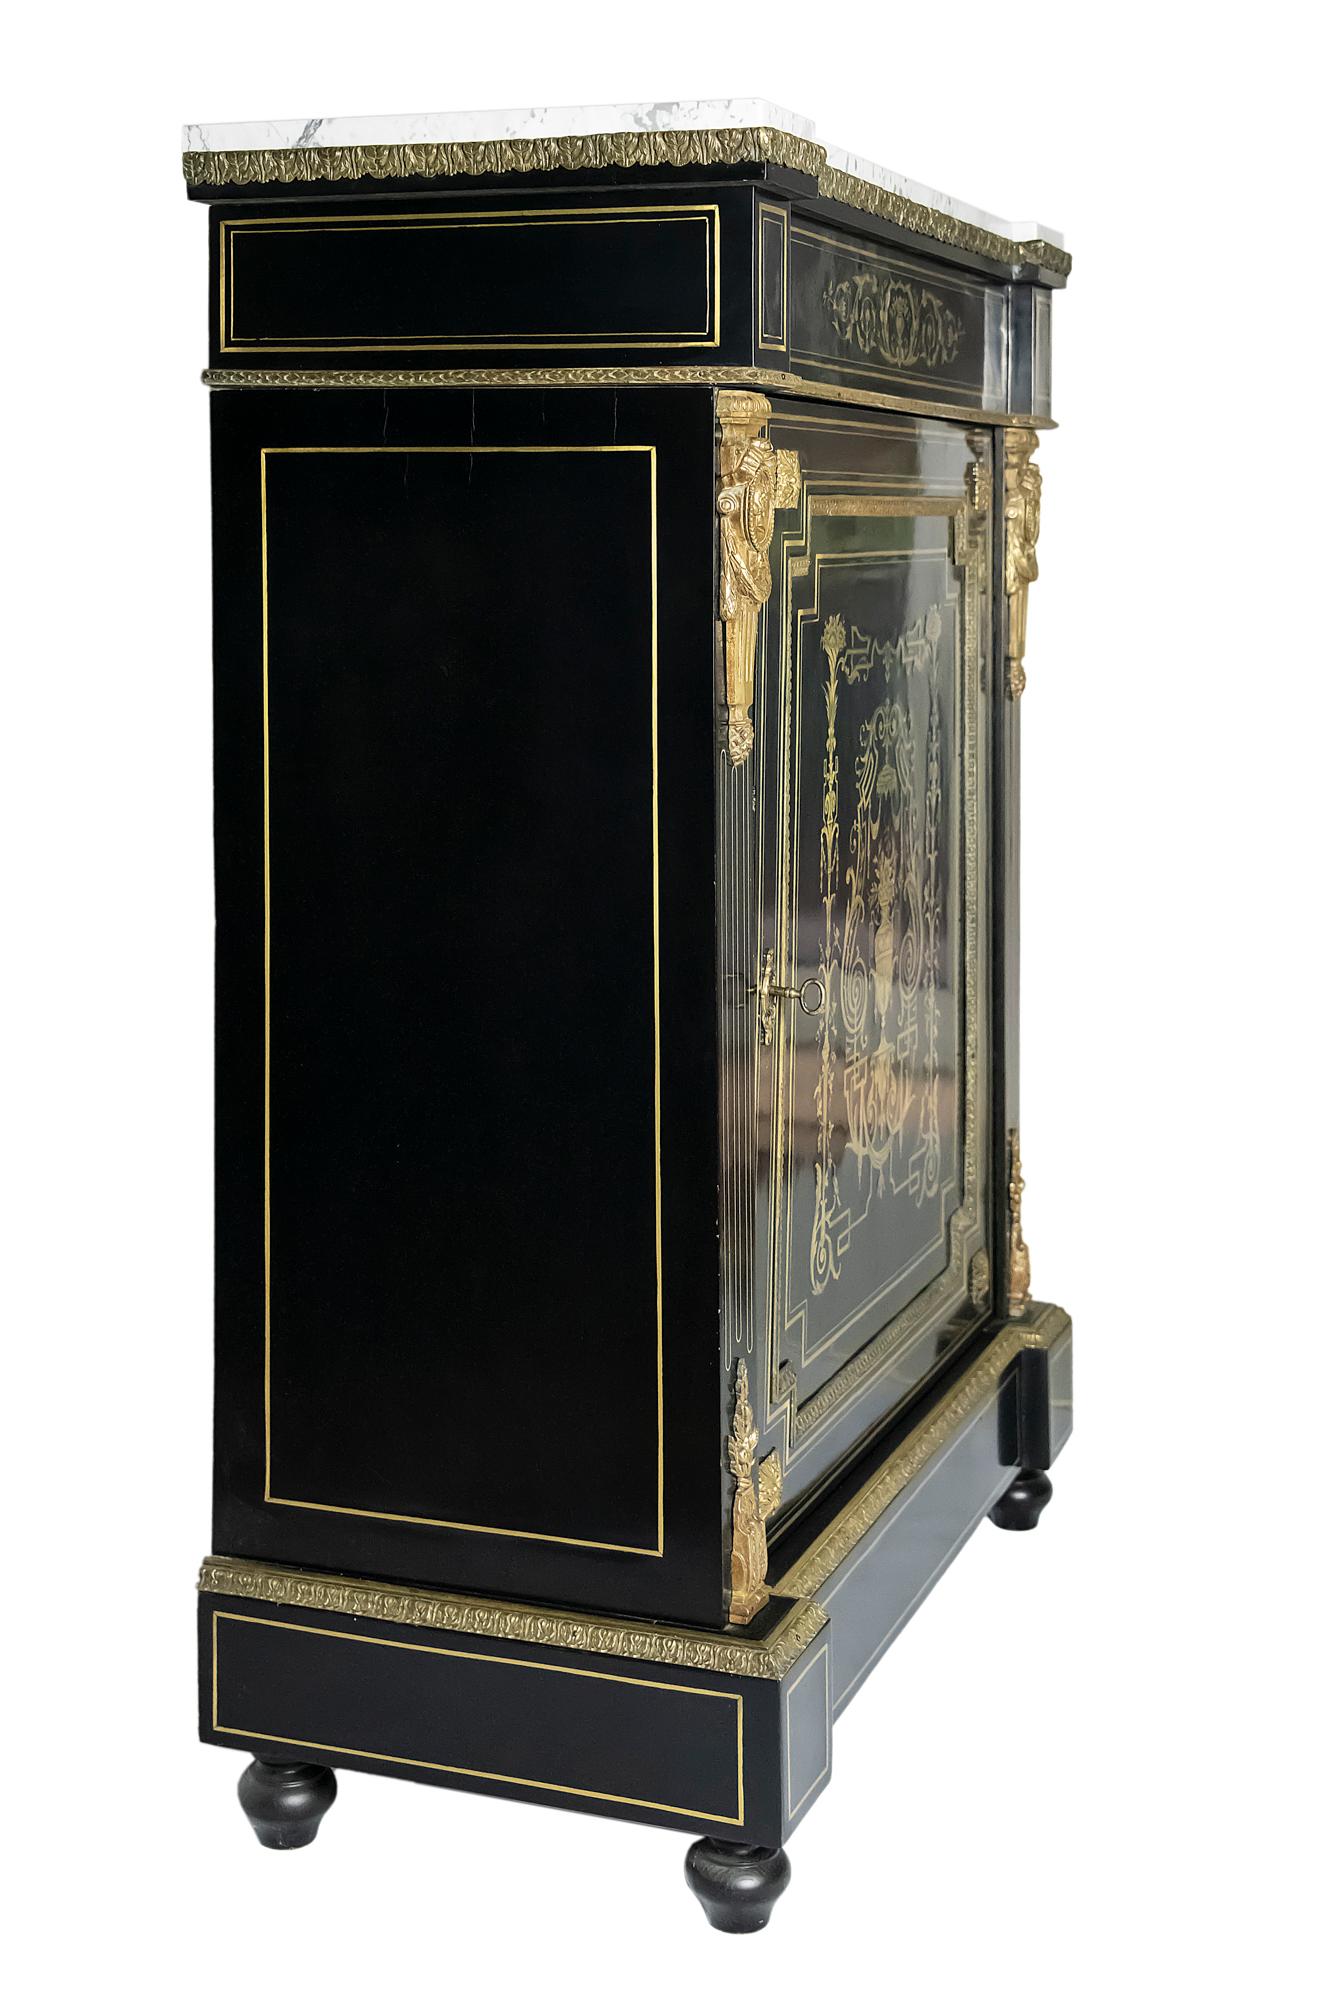 French antique Napoleon III cabinet.
Wood is black color polished surface, decorated with inlaid brass decor and bronze details ourside.
Inside the cabinet there are two shelves.
Cabinet top is marble.
This cabinet is after a very good quality